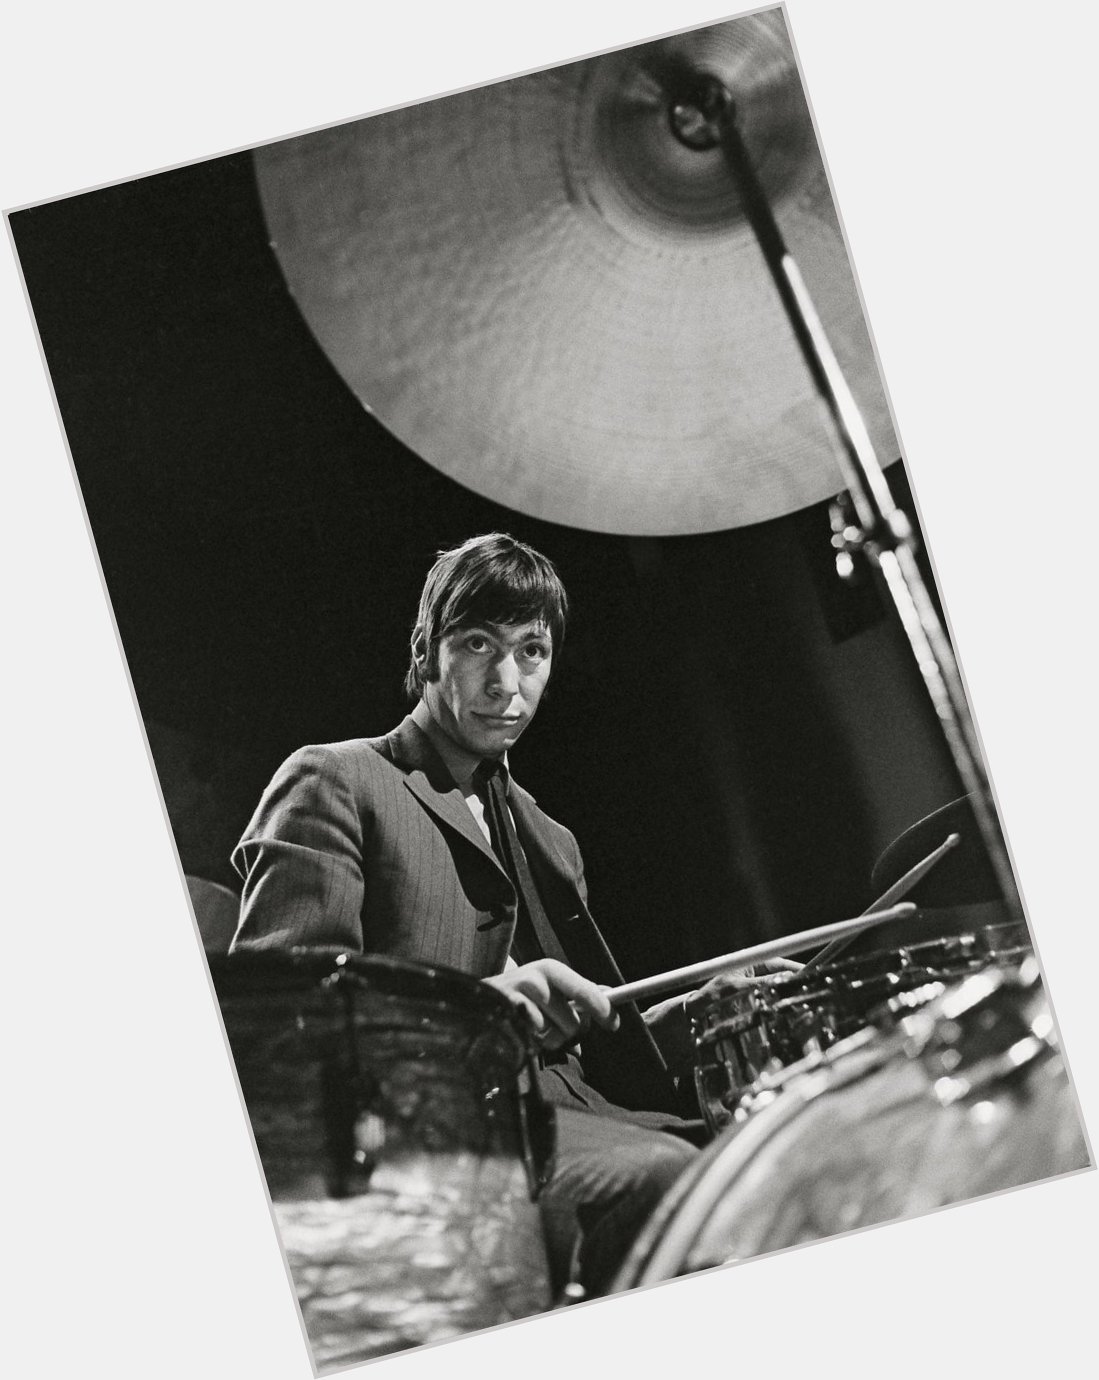 Happy Birthday Charlie Watts - A Rolling Stone born in this day in 1941 !! 